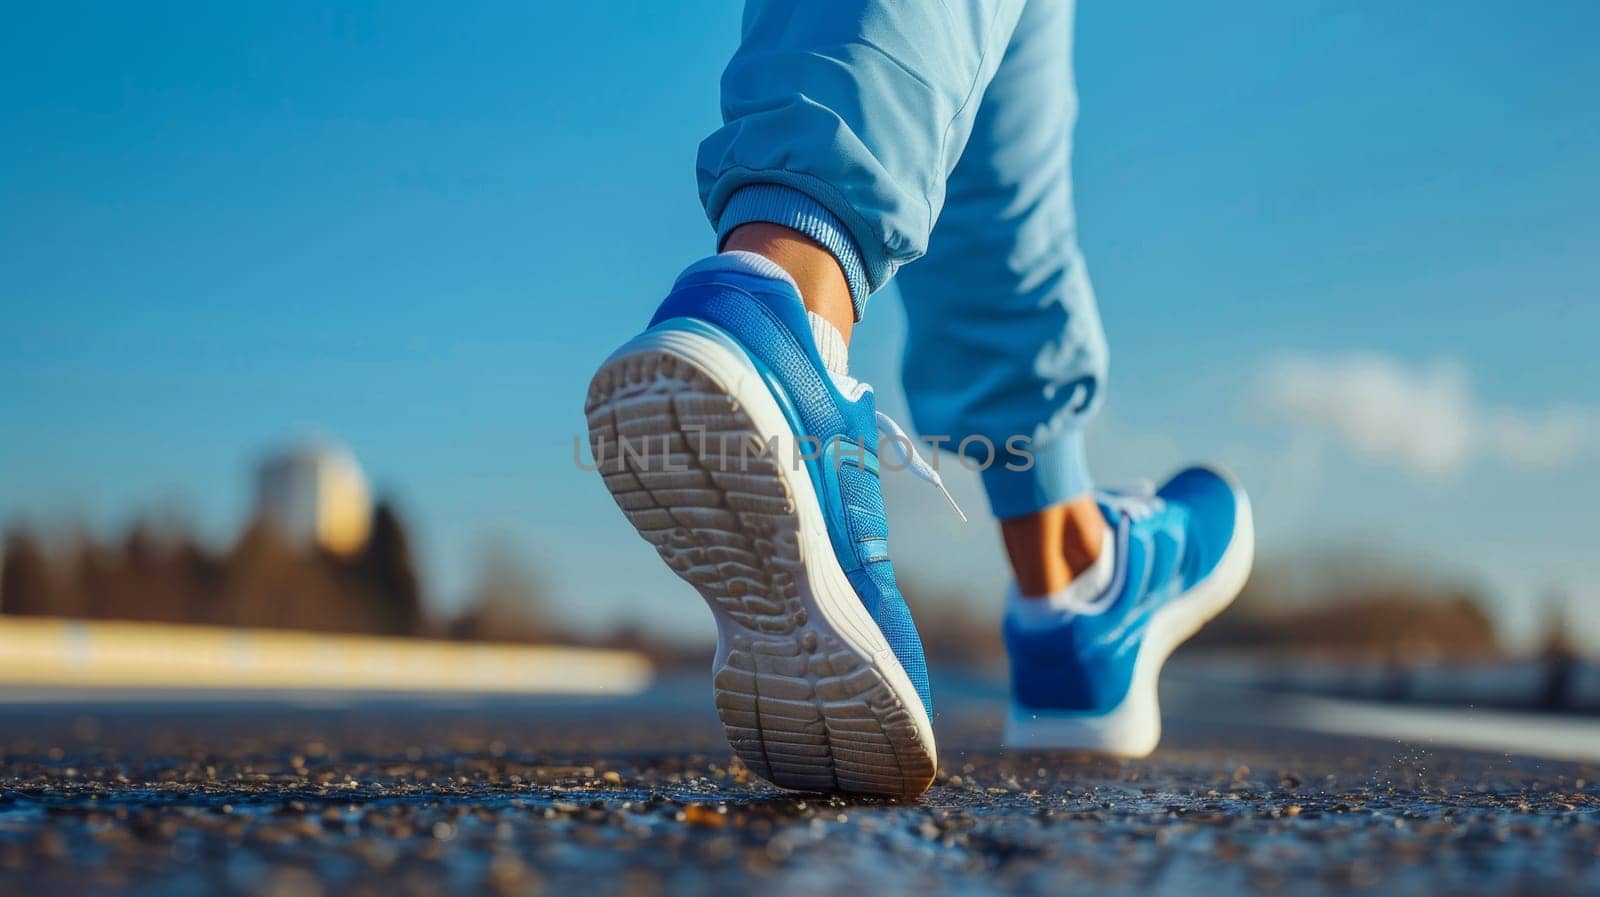 A person wearing blue sneakers running on a road